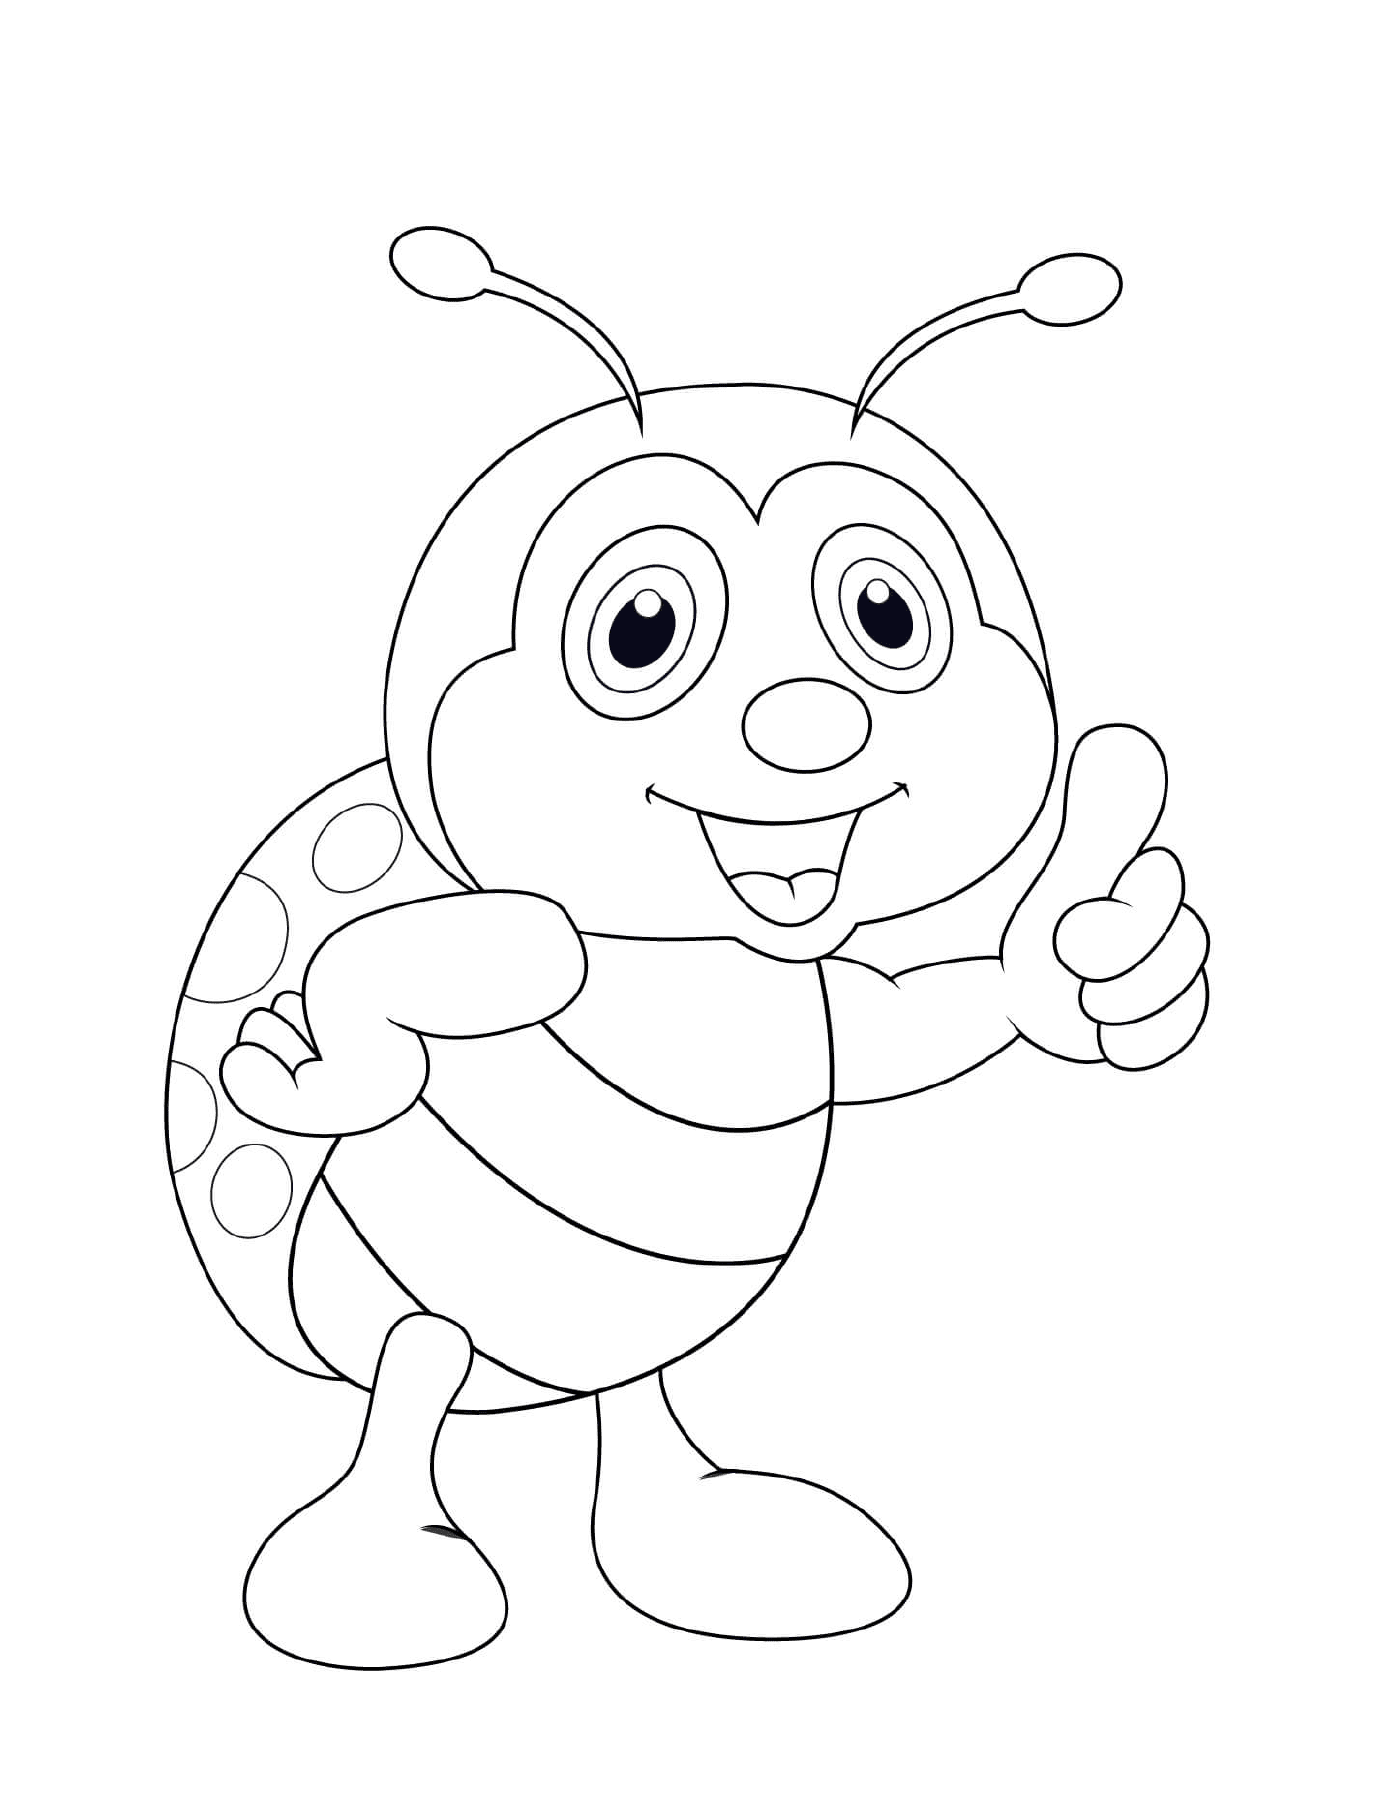  Animated drawing of a standing ladybug, raised inch 